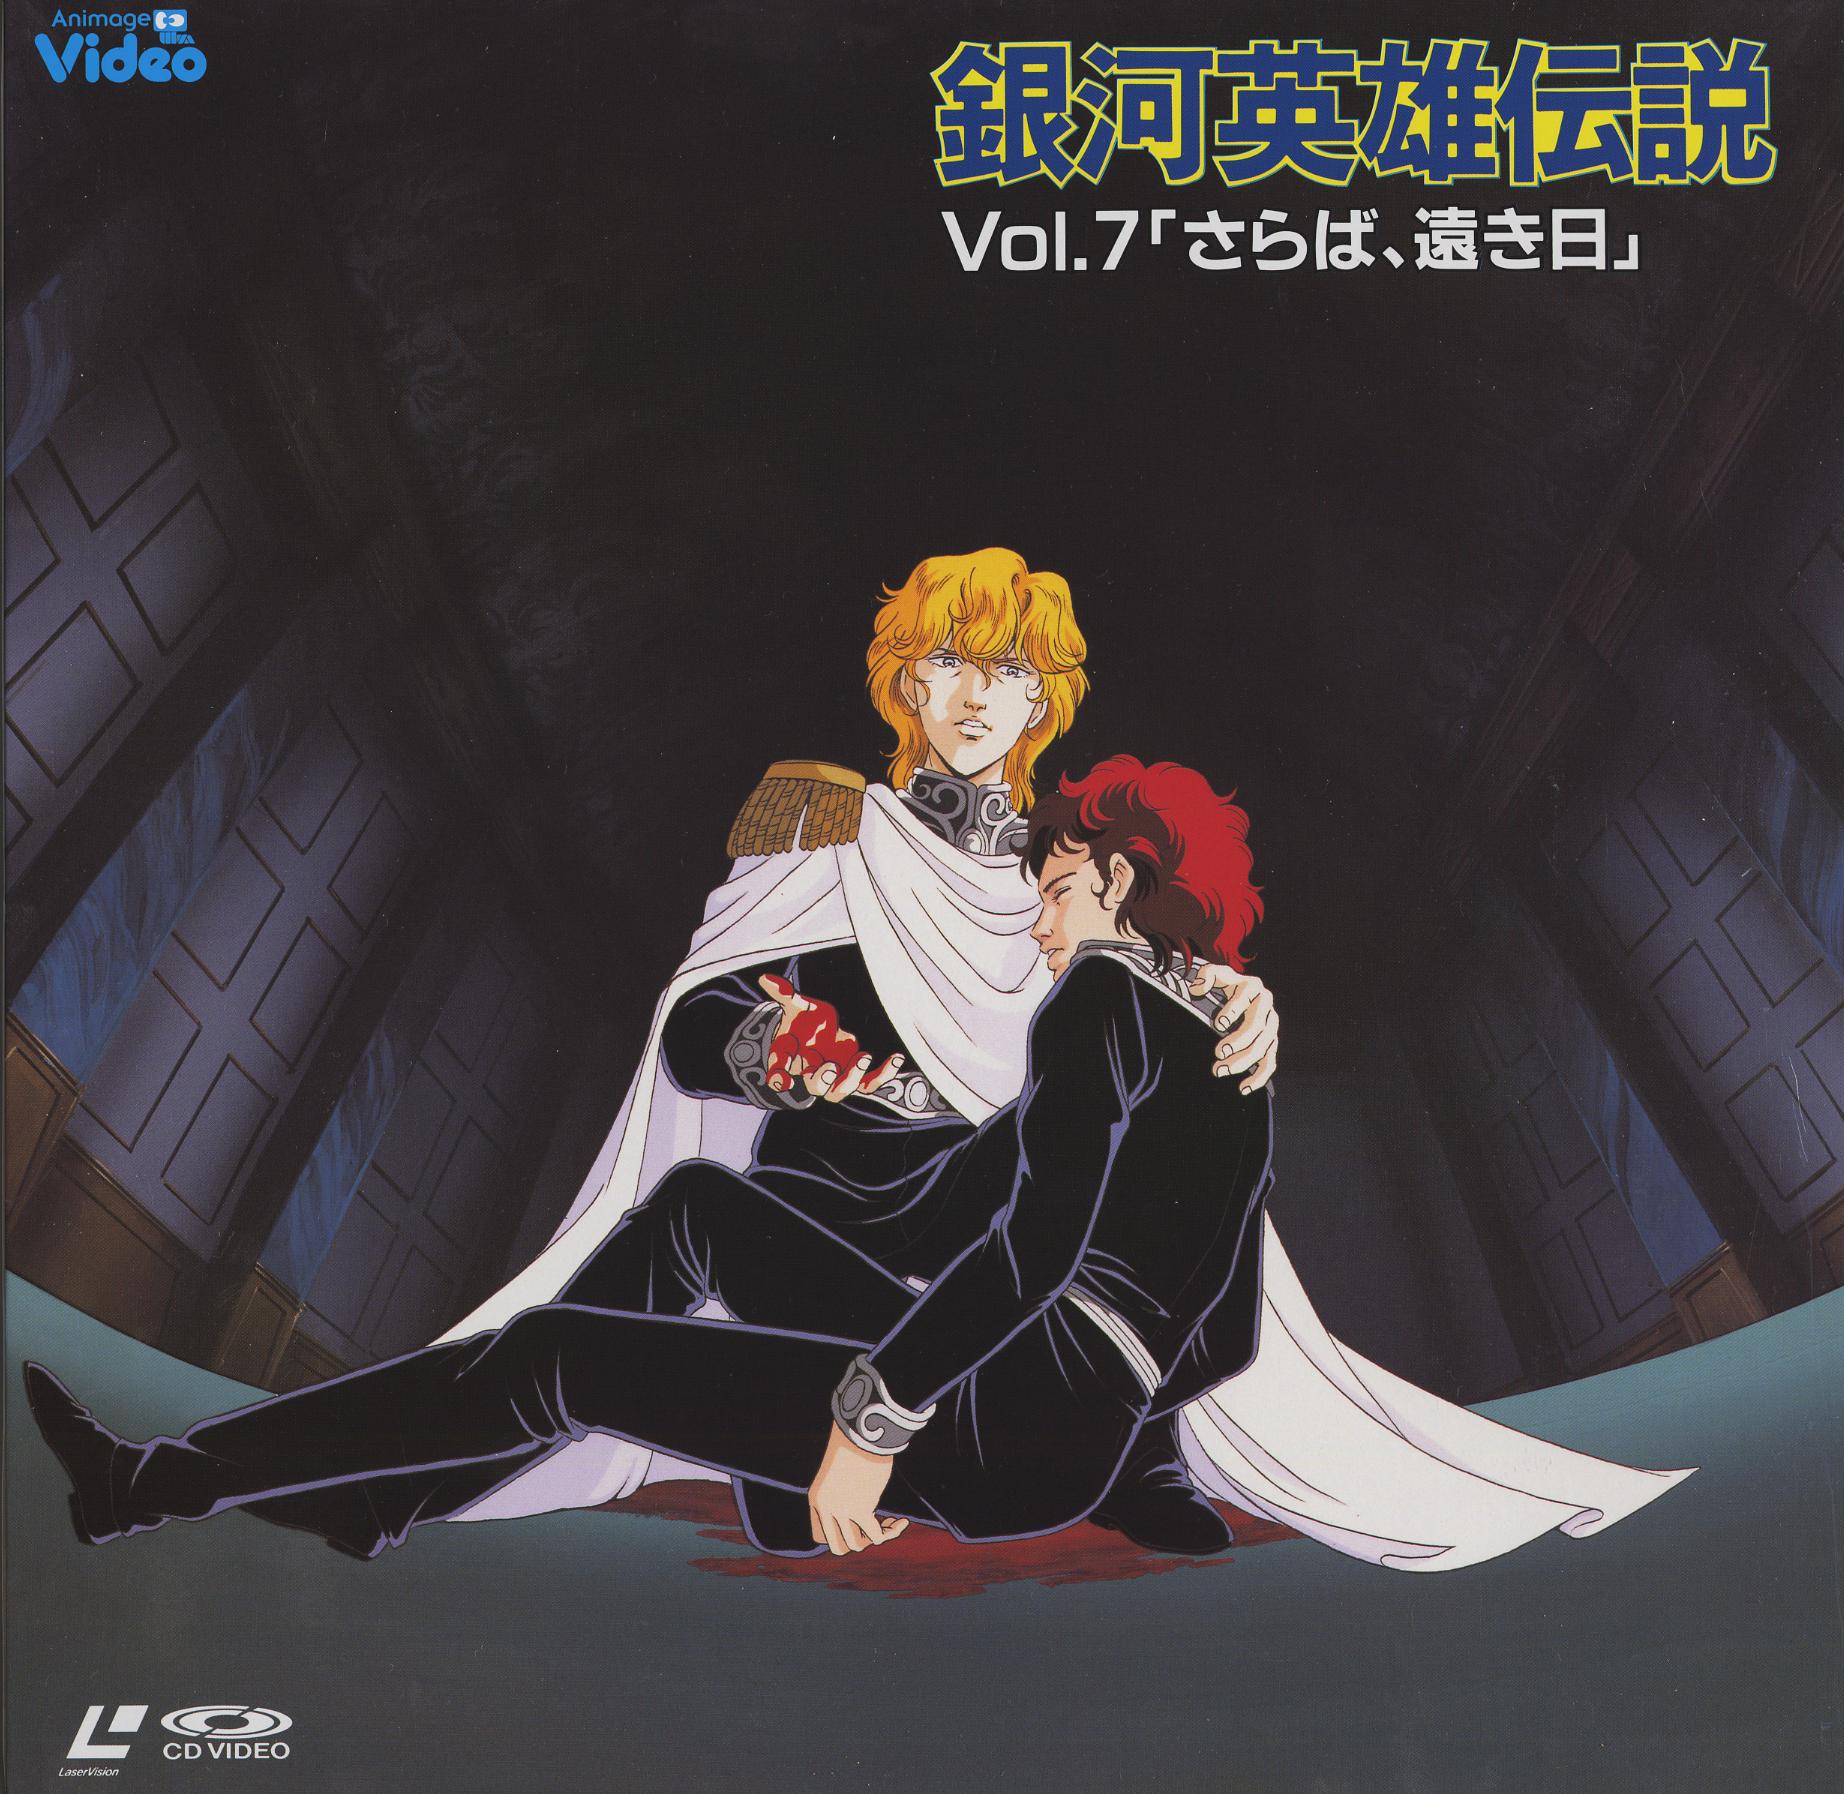 Legend Of The Galactic Heroes Wallpapers